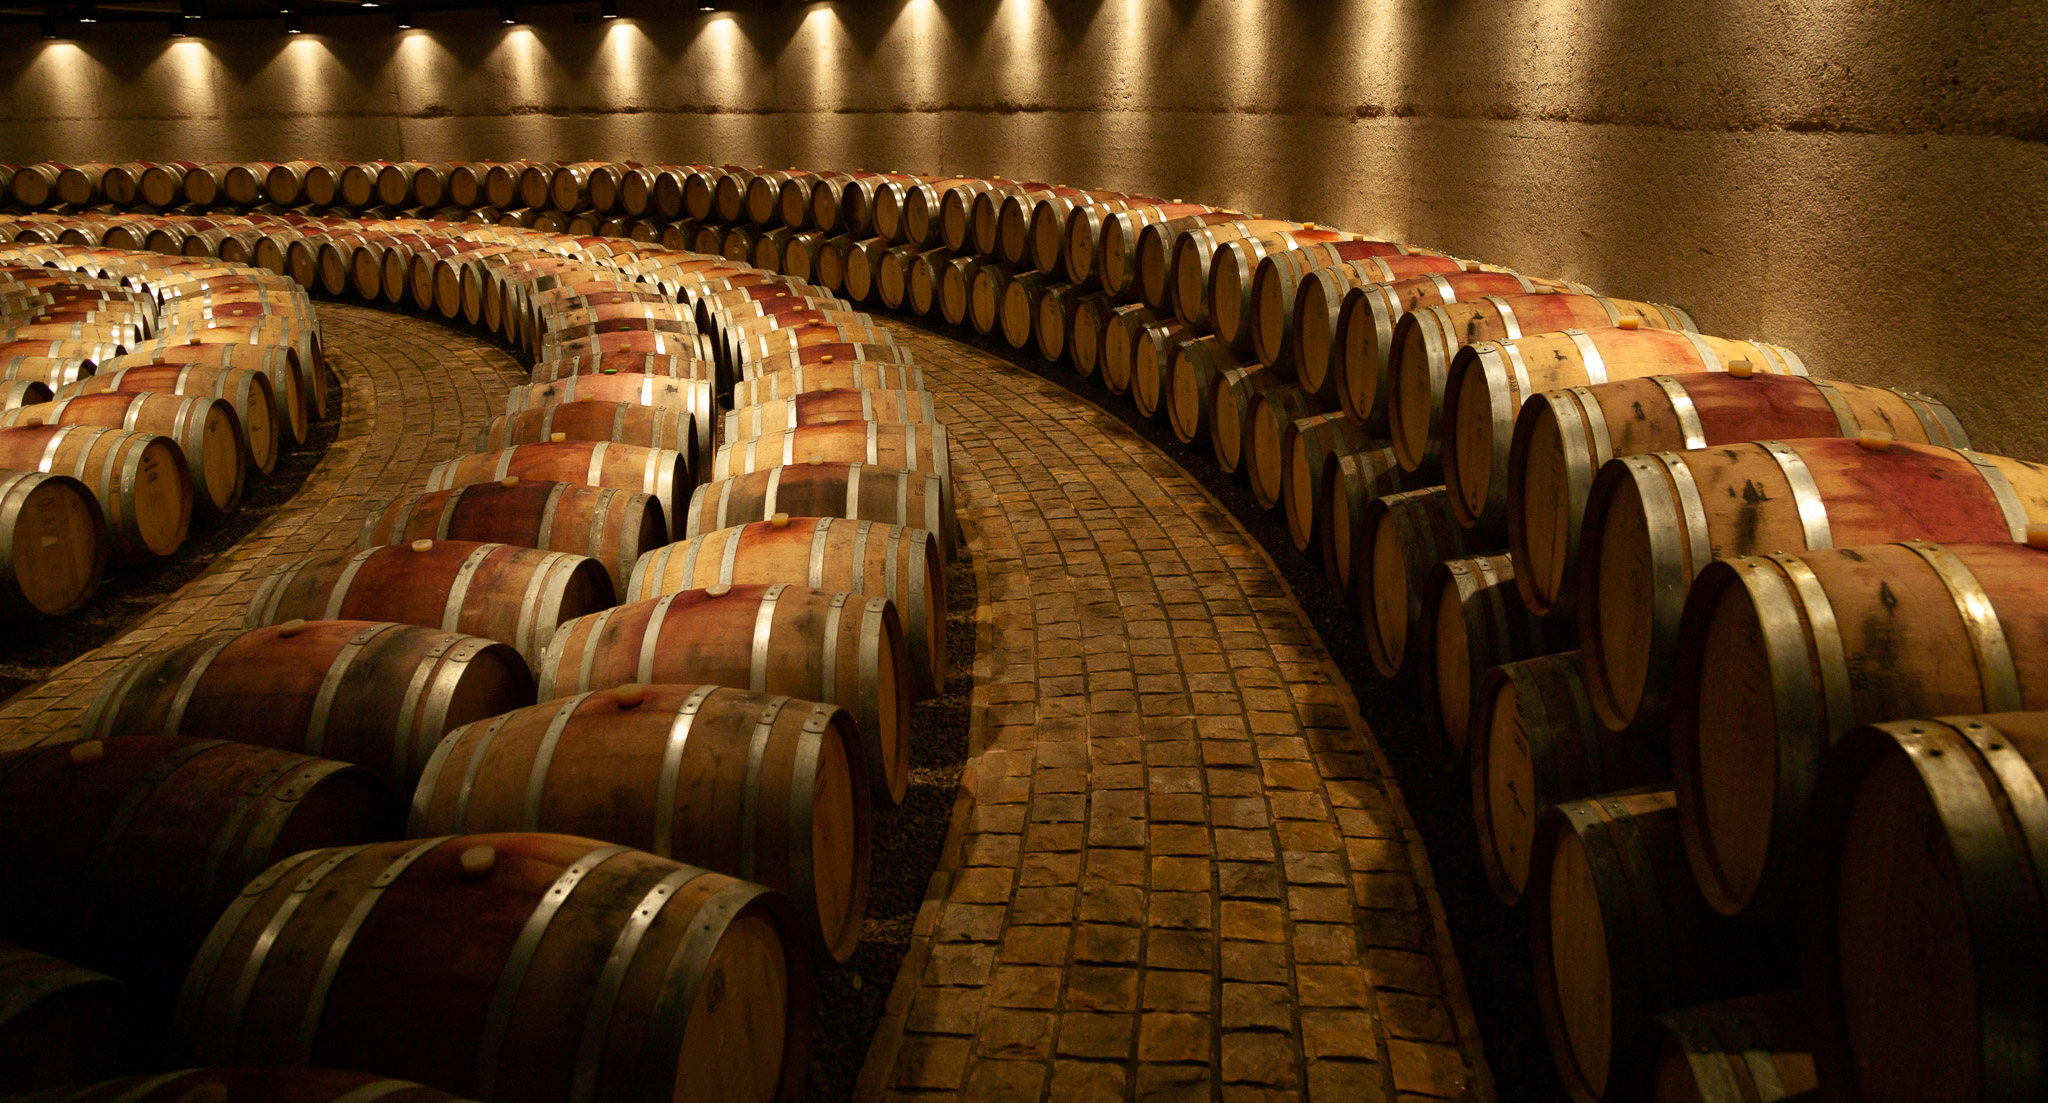 Bodego Zapata, another beautiful barrel room